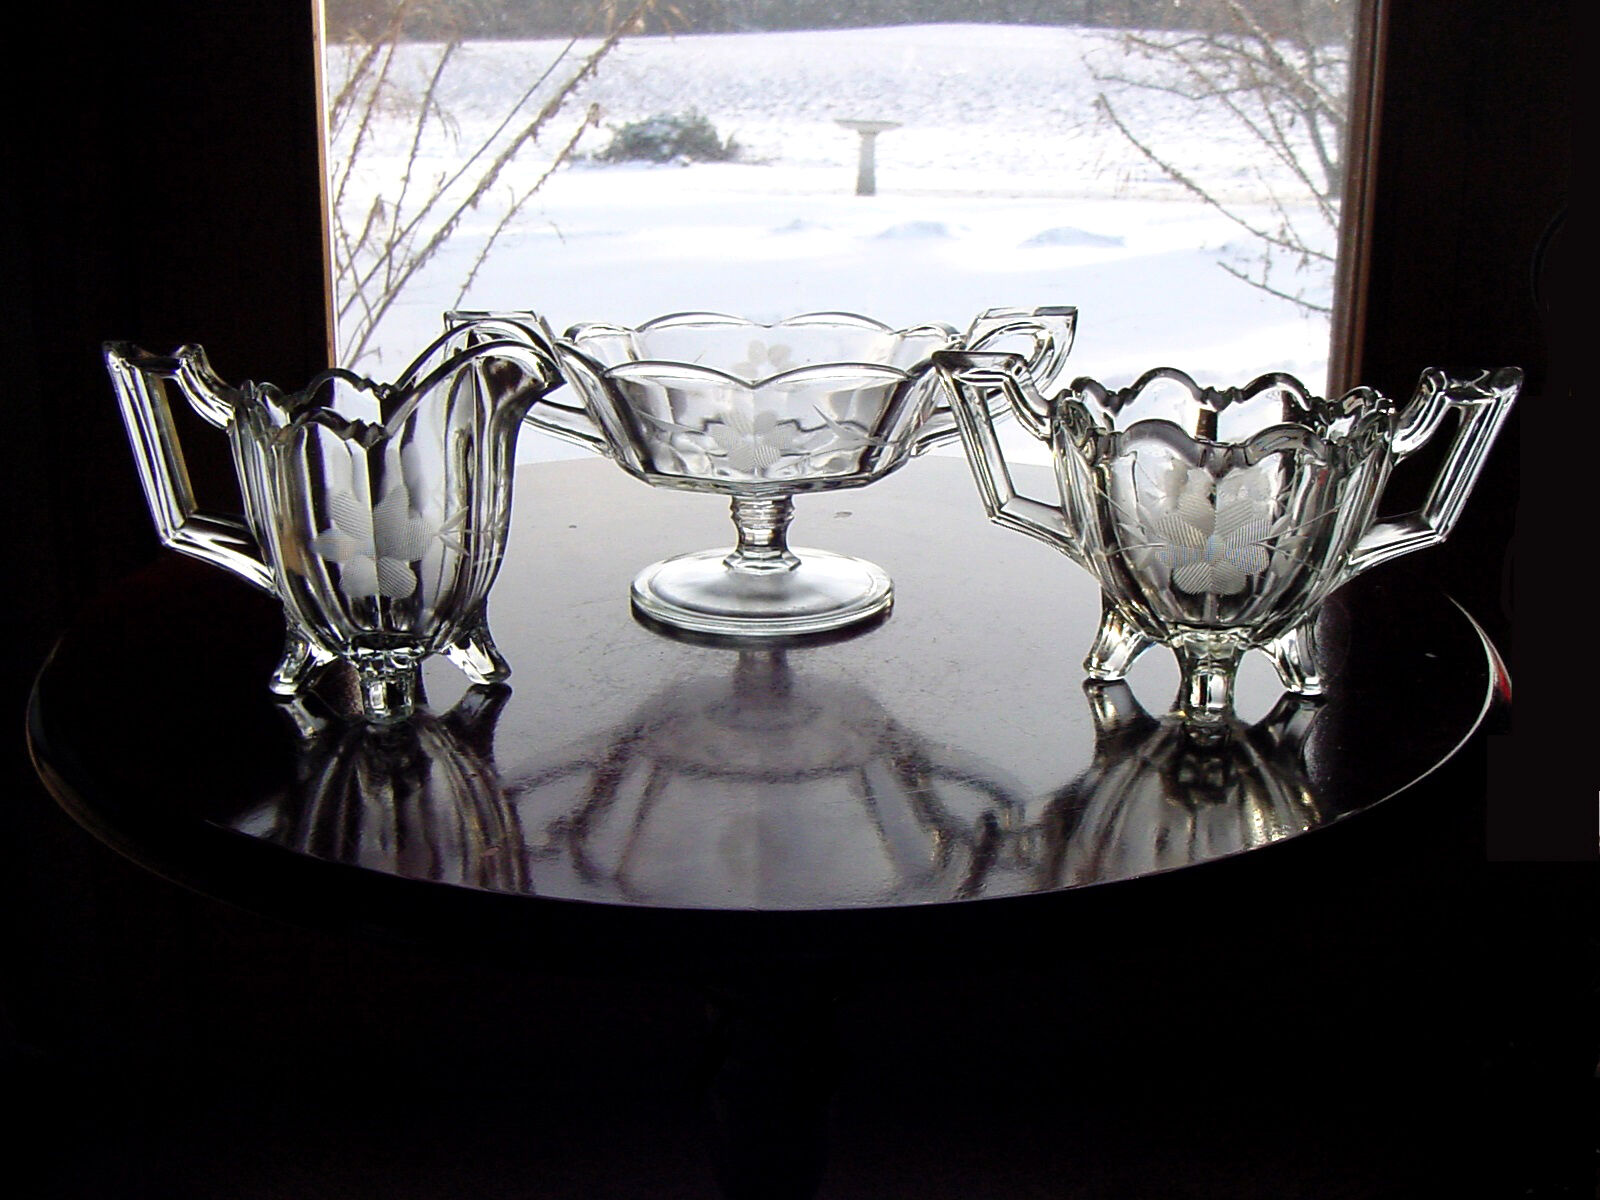 AnTiQuE ETCHeD CuT ArT DeCo PaNeLeD Glass Sugar Bowl Creamer Jelly Compote Dish